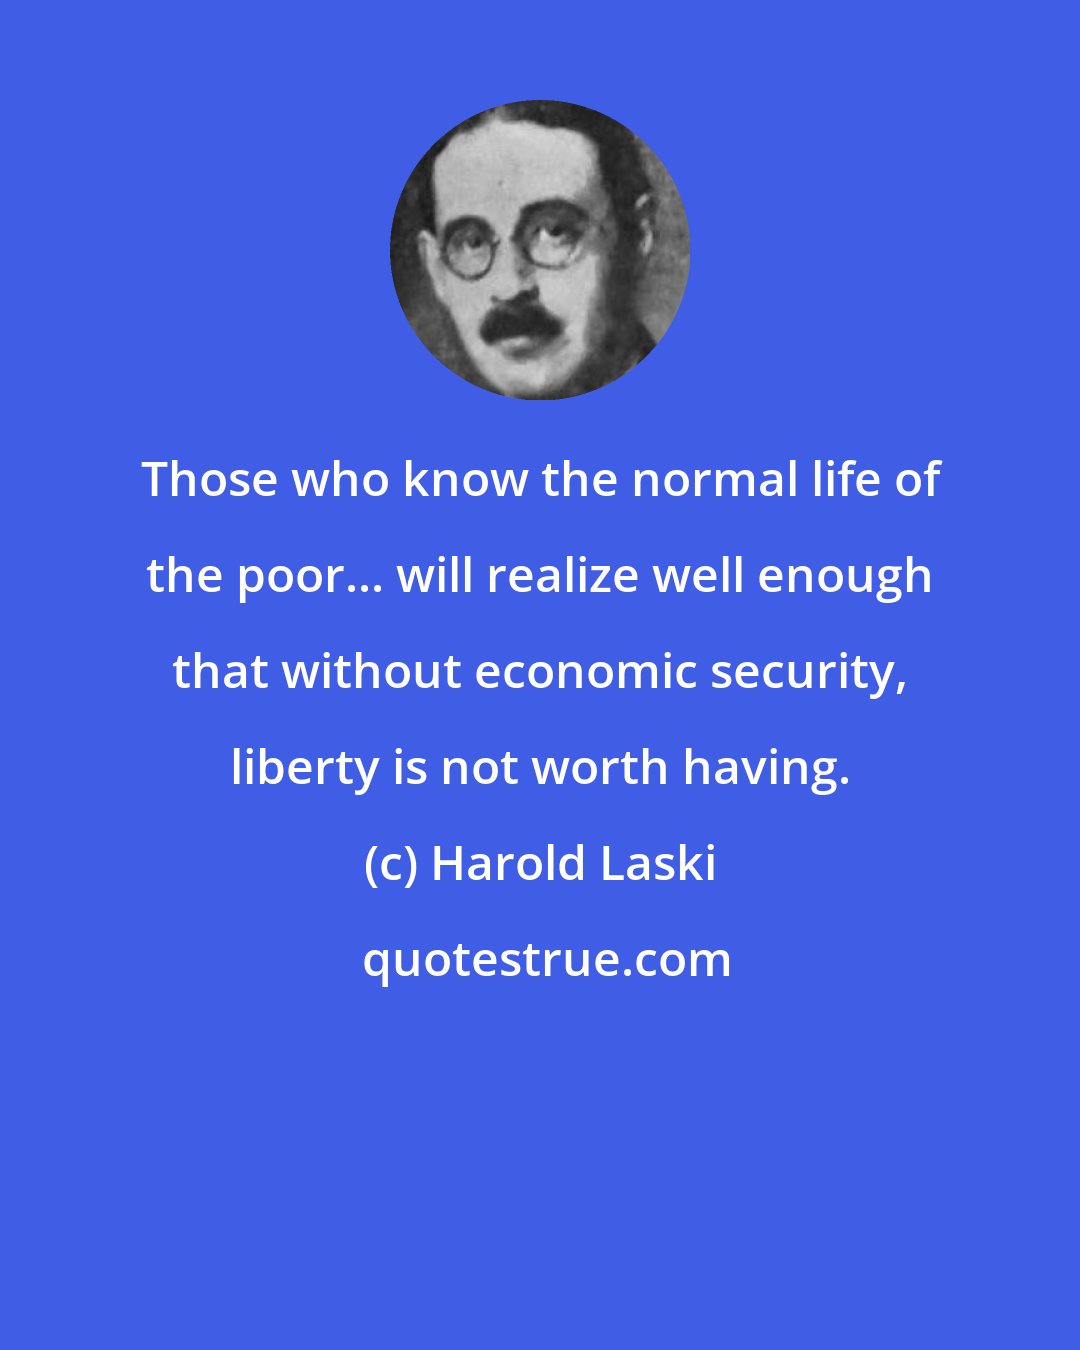 Harold Laski: Those who know the normal life of the poor... will realize well enough that without economic security, liberty is not worth having.